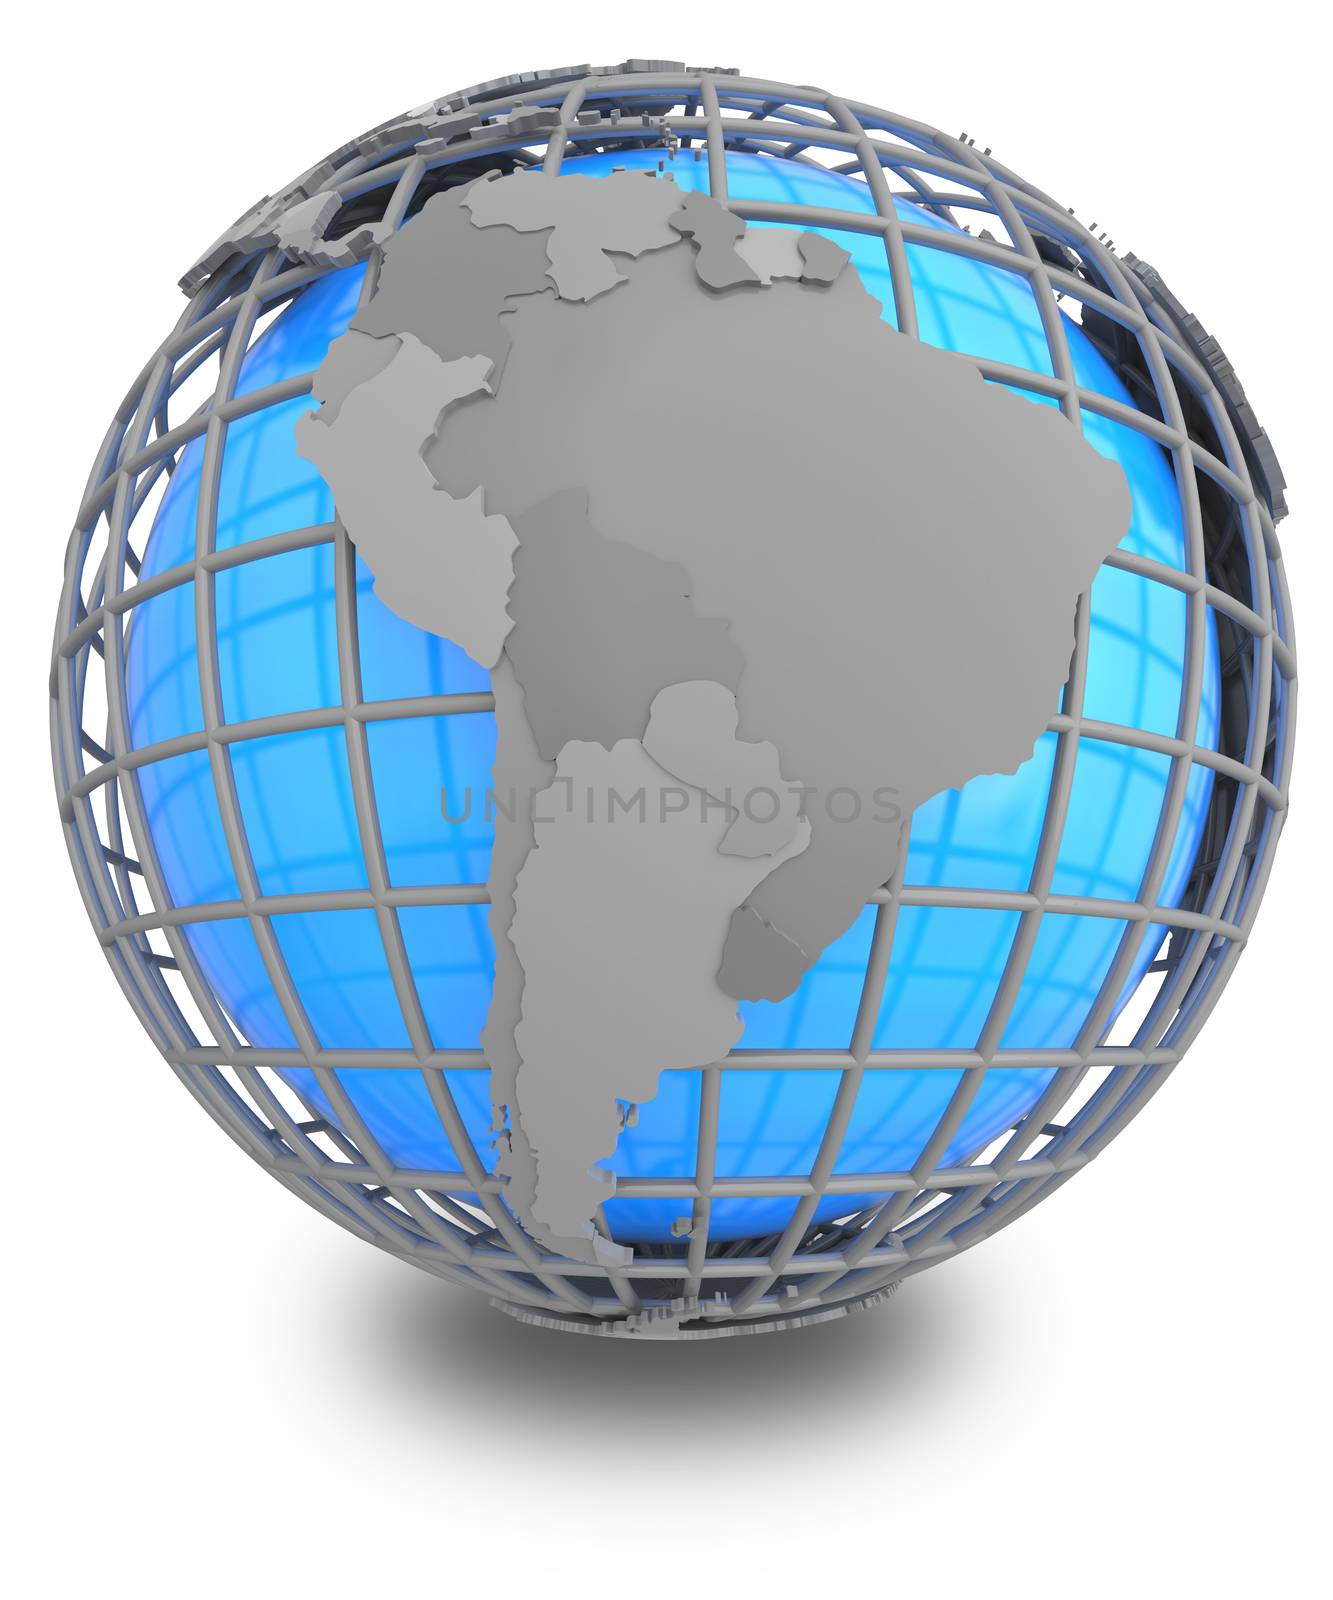 South America on a grey geographic net enveloping Earth, isolated on white background.